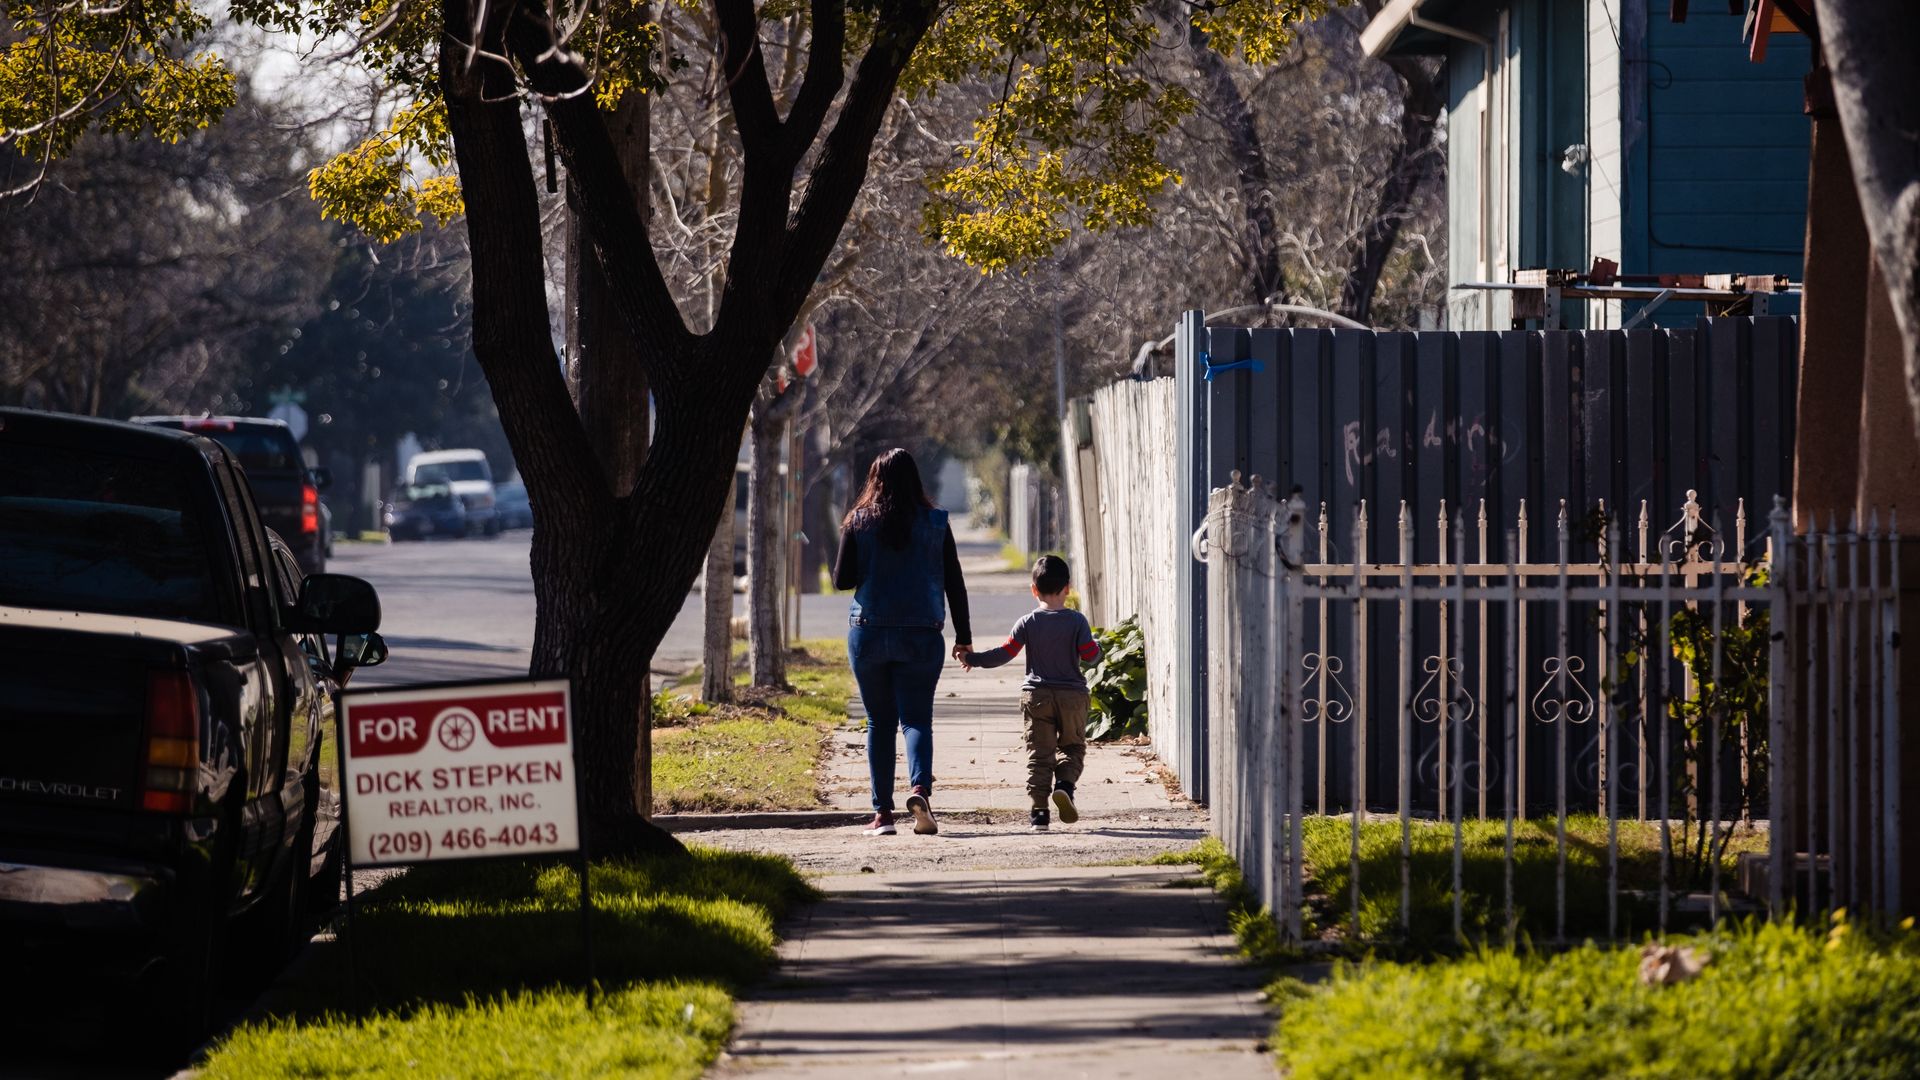 A mother and son walk in a Stockton, Calif., neighborhood